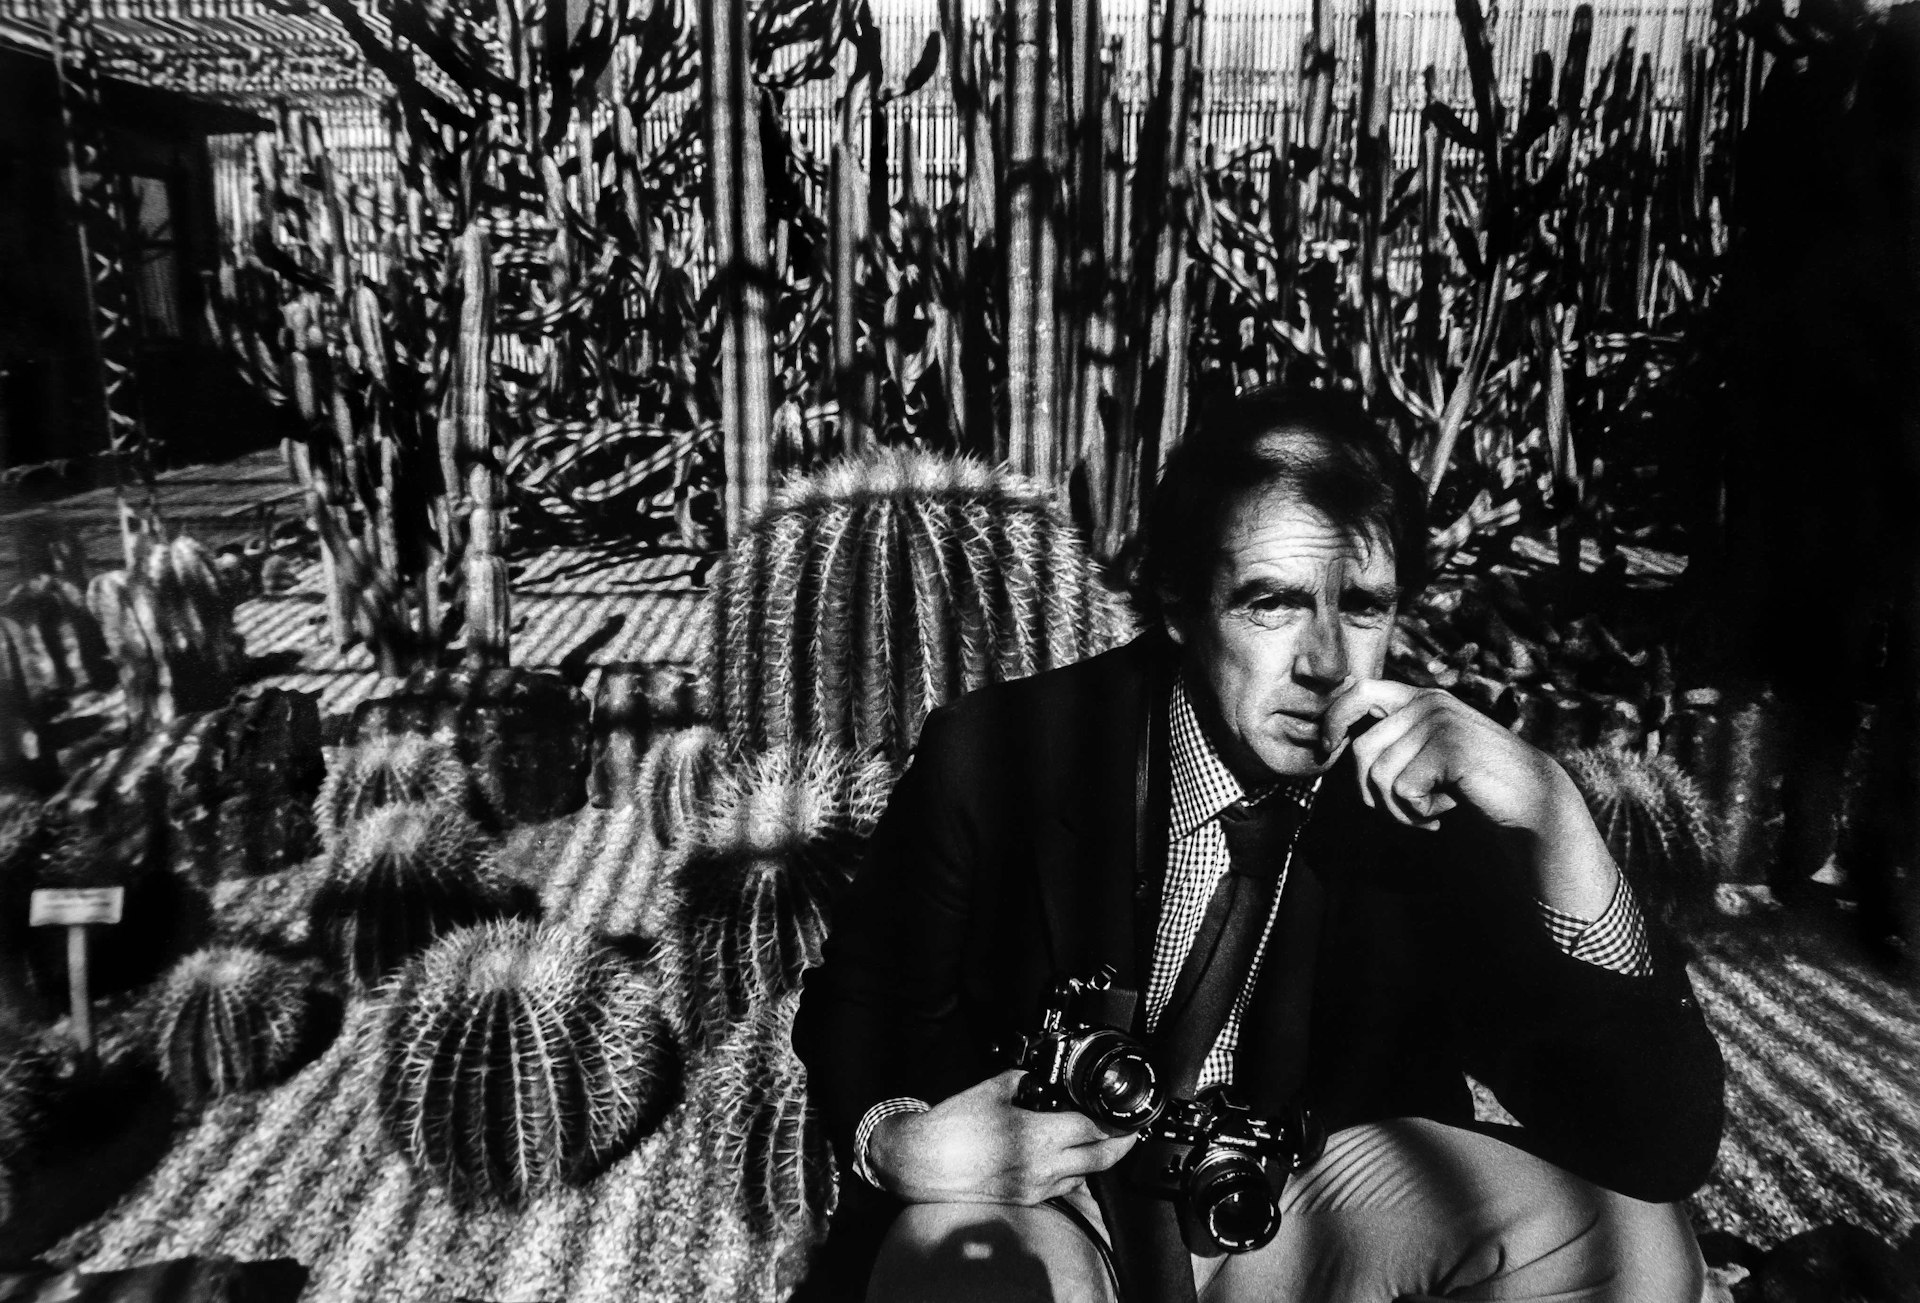 Tempe. David HURN in the Botanical gardens, photographer by his friend Bill JAY. 1980. 2017